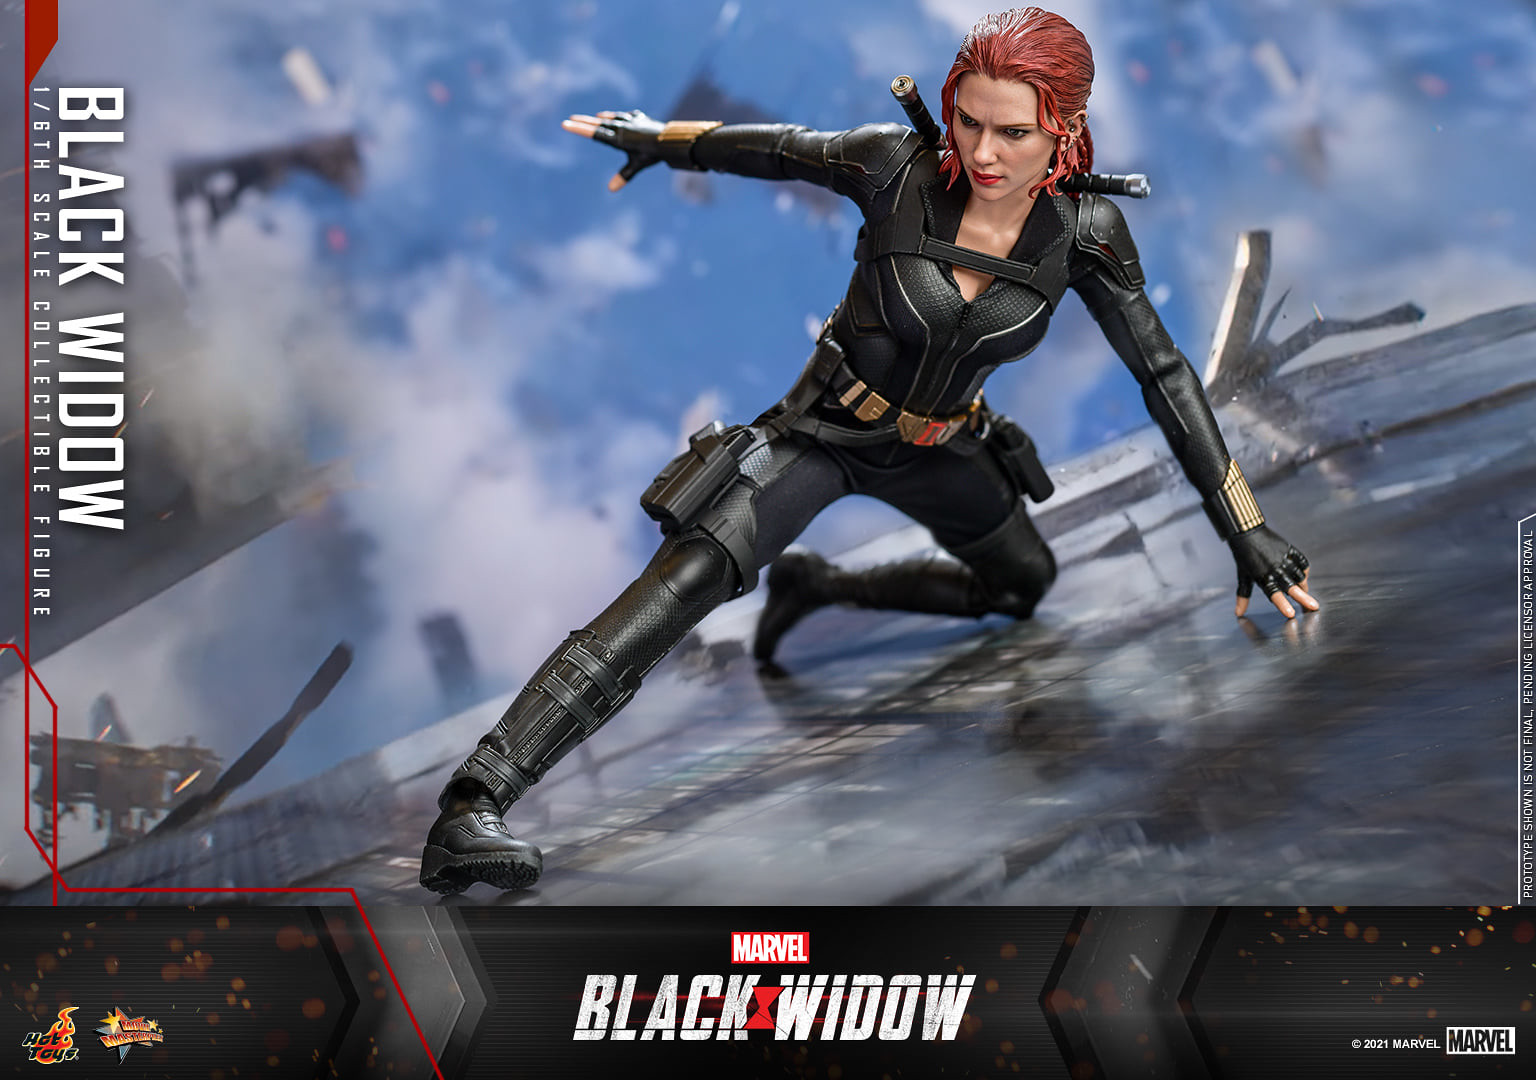 NEW PRODUCT: Hot Toys Black Widow - 1/6th scale Black Widow Collectible Figure 51310531762_d956ea4fc6_h